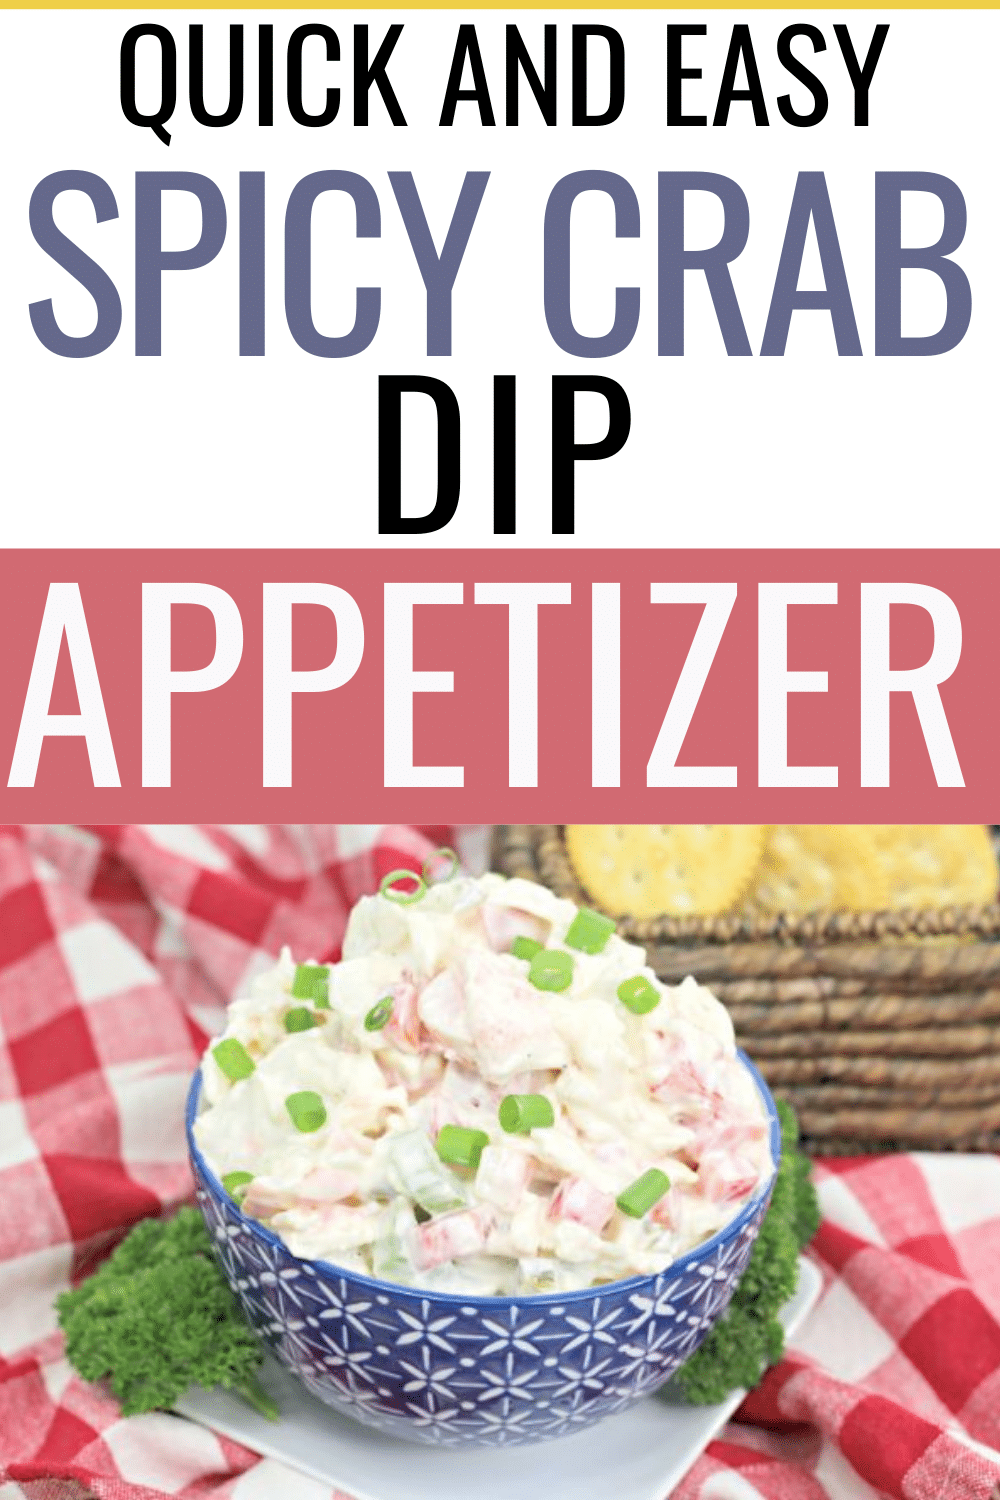 Spicy Crab Dip is the perfect party food. Crab meat, bell peppers, cream cheese and more make this a decadent appetizer for any party. #crab #appetizers #dip via @wondermomwannab